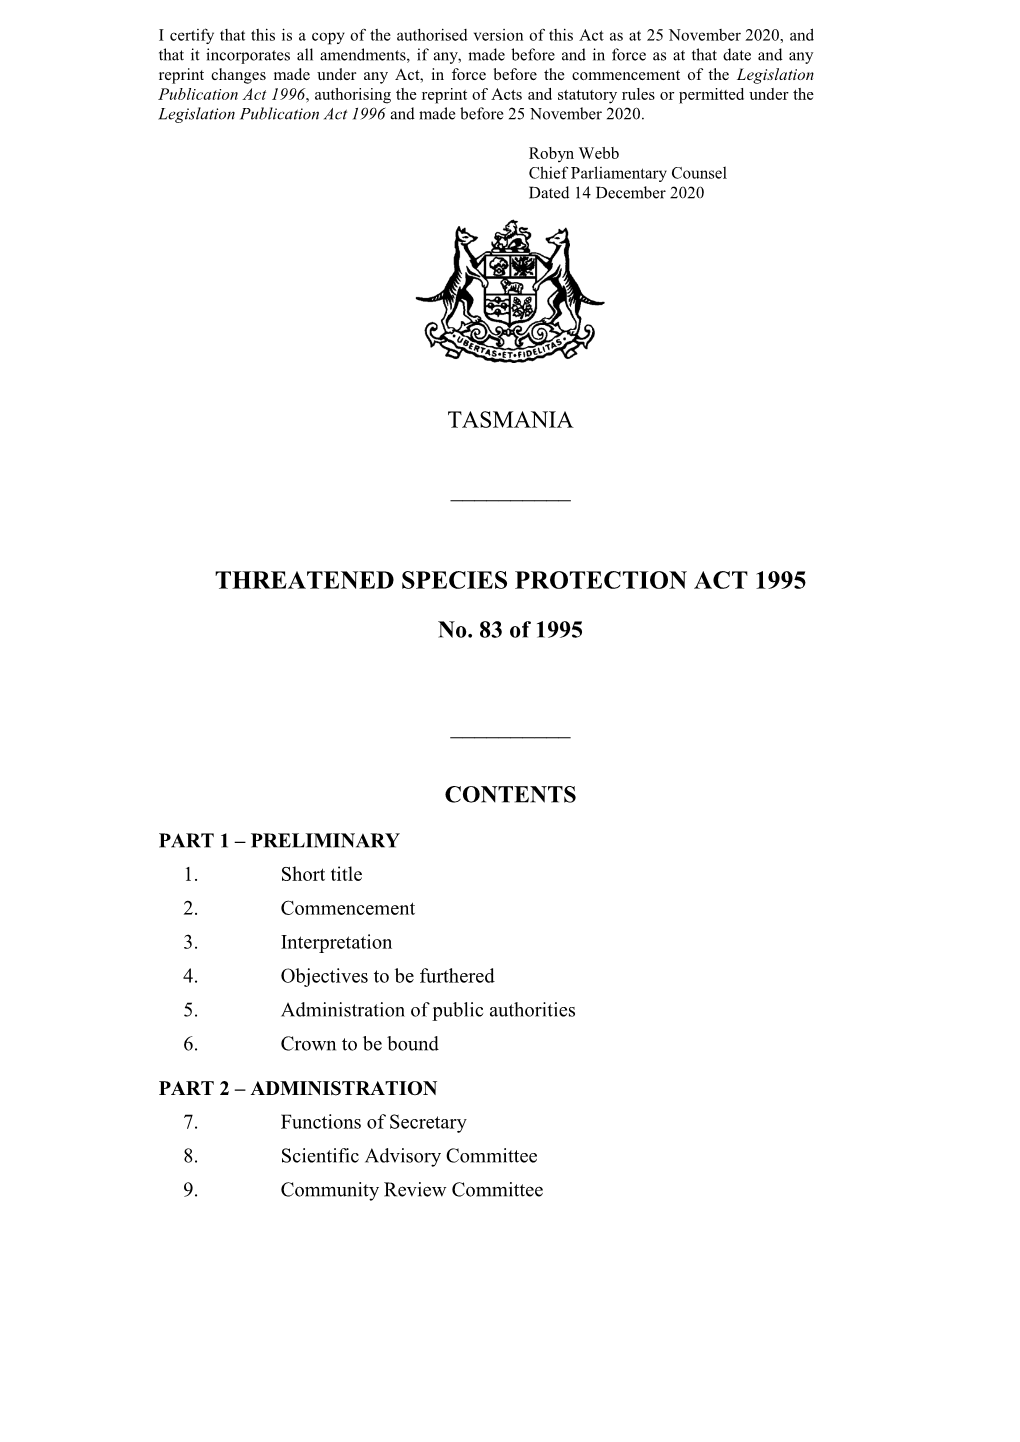 Threatened Species Protection Act 1995